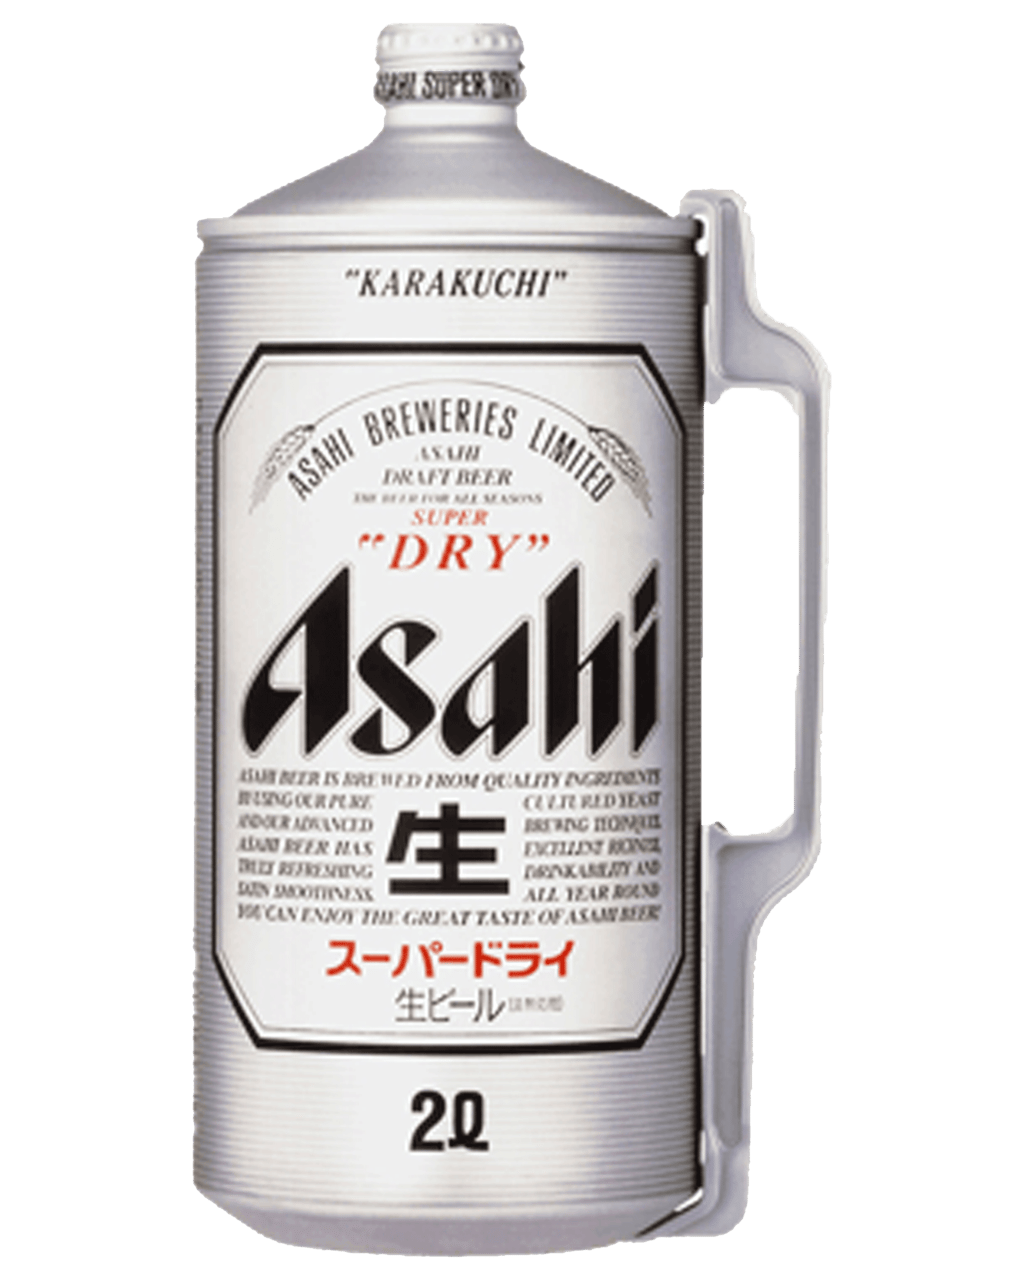 Is Japan's new Asahi Super Dry beer better or worse than the original  formula?